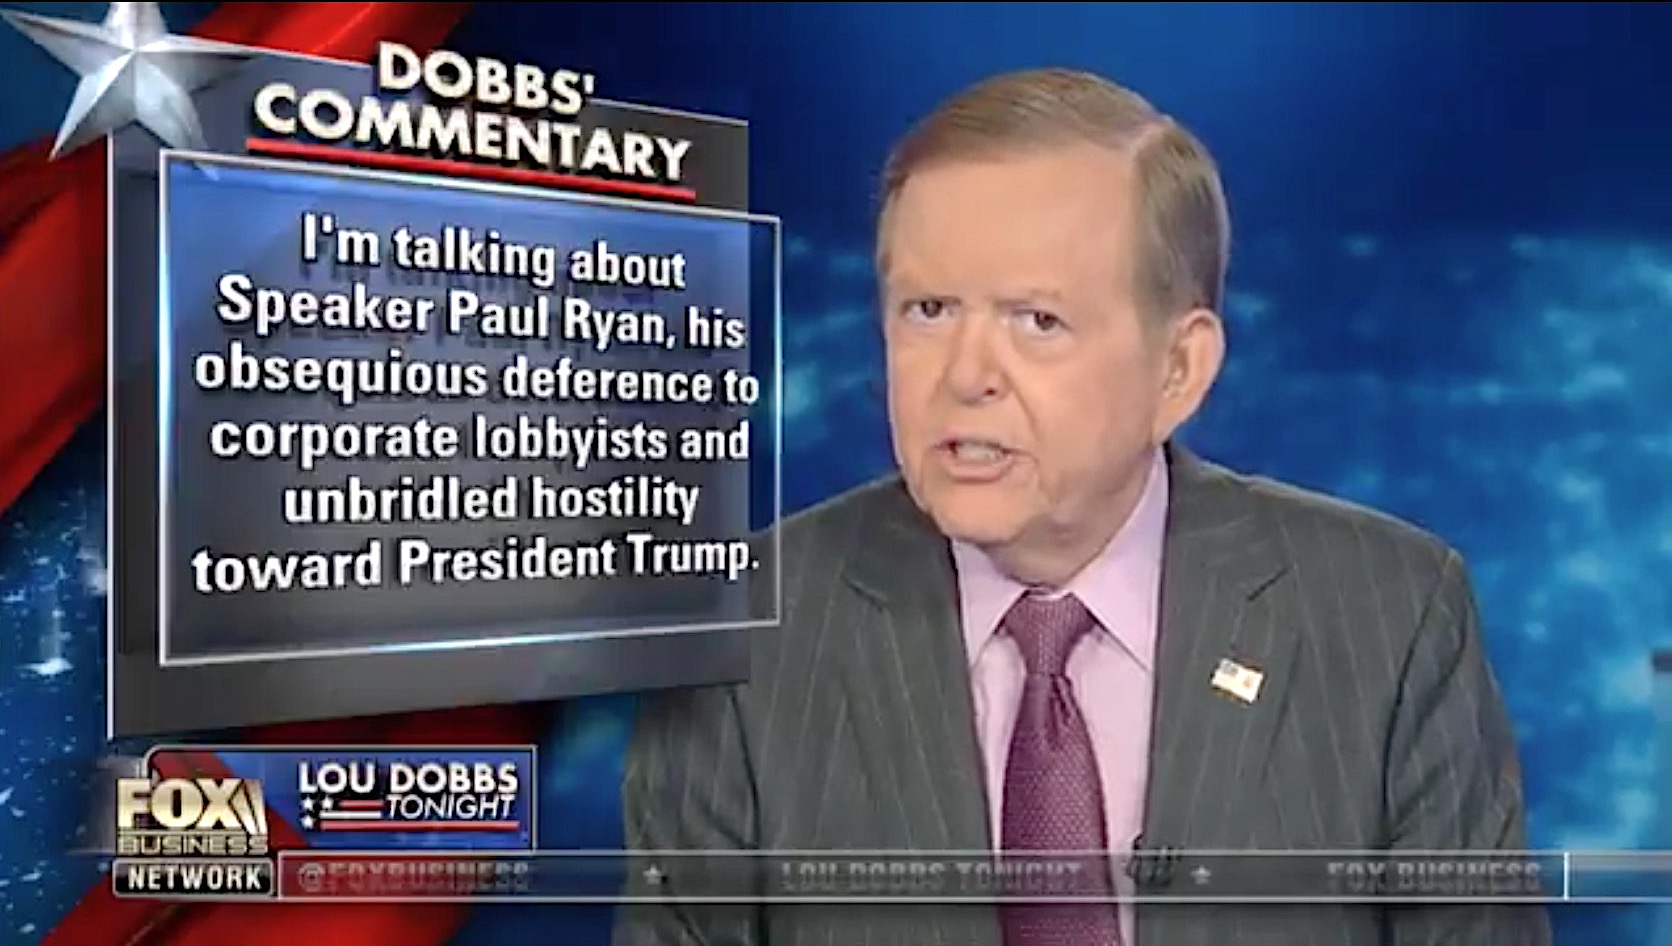 Lou Dobbs takes Paul Ryan to the woodshed